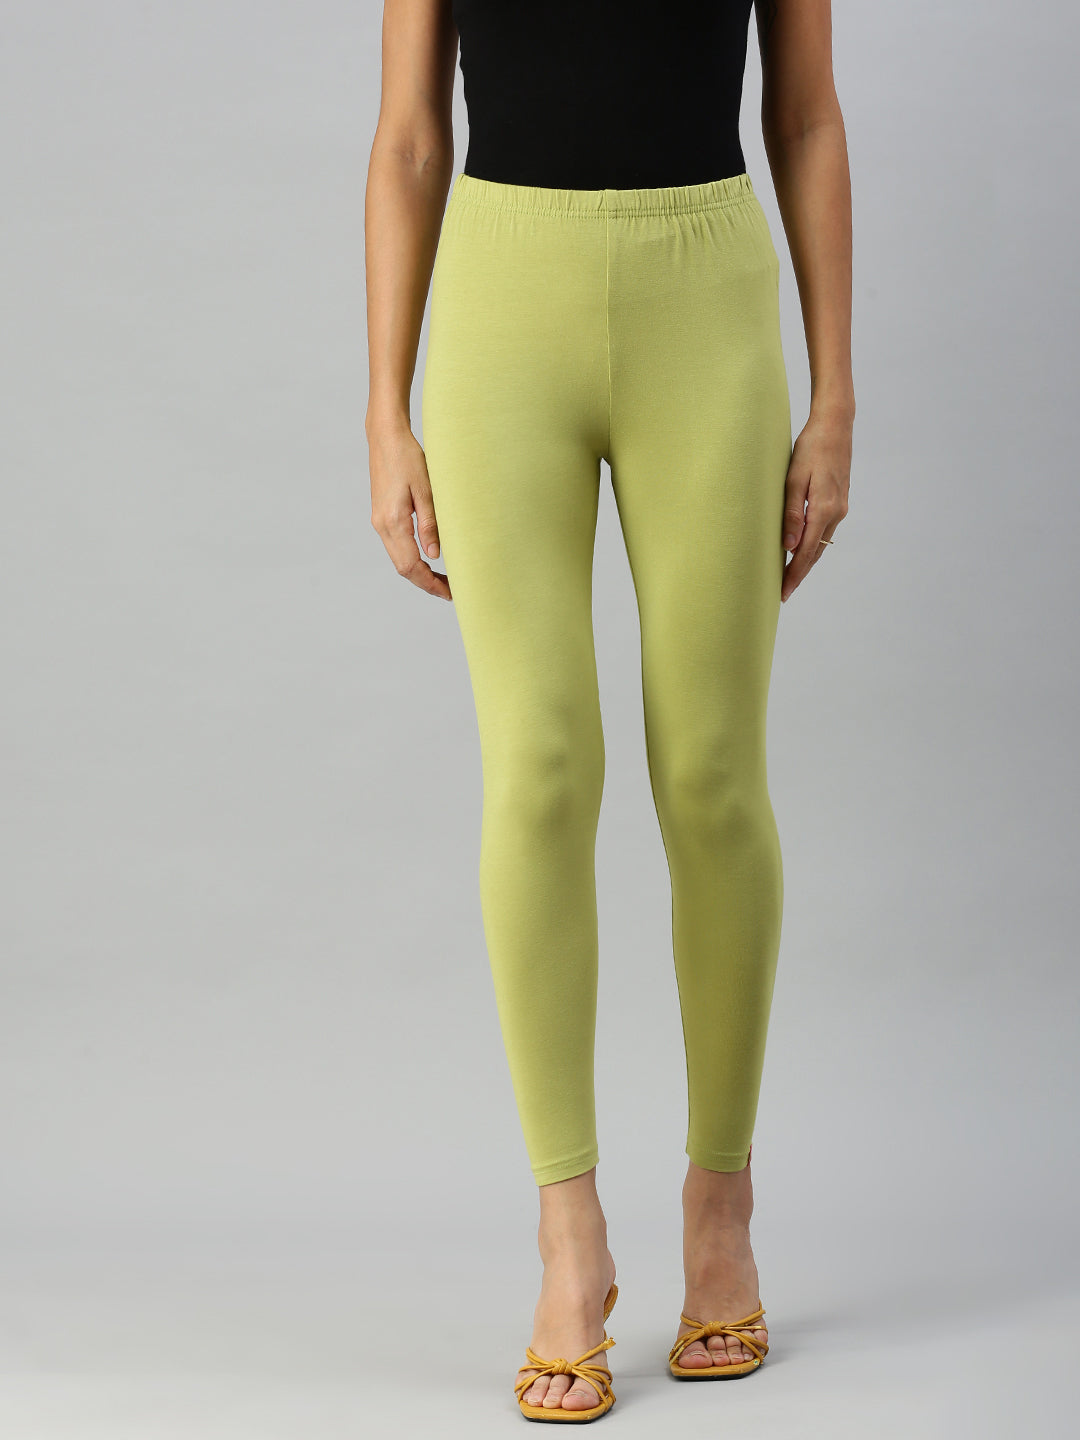 Shop Prisma Ankle Leggings in Mojito - Perfect Fit & Style